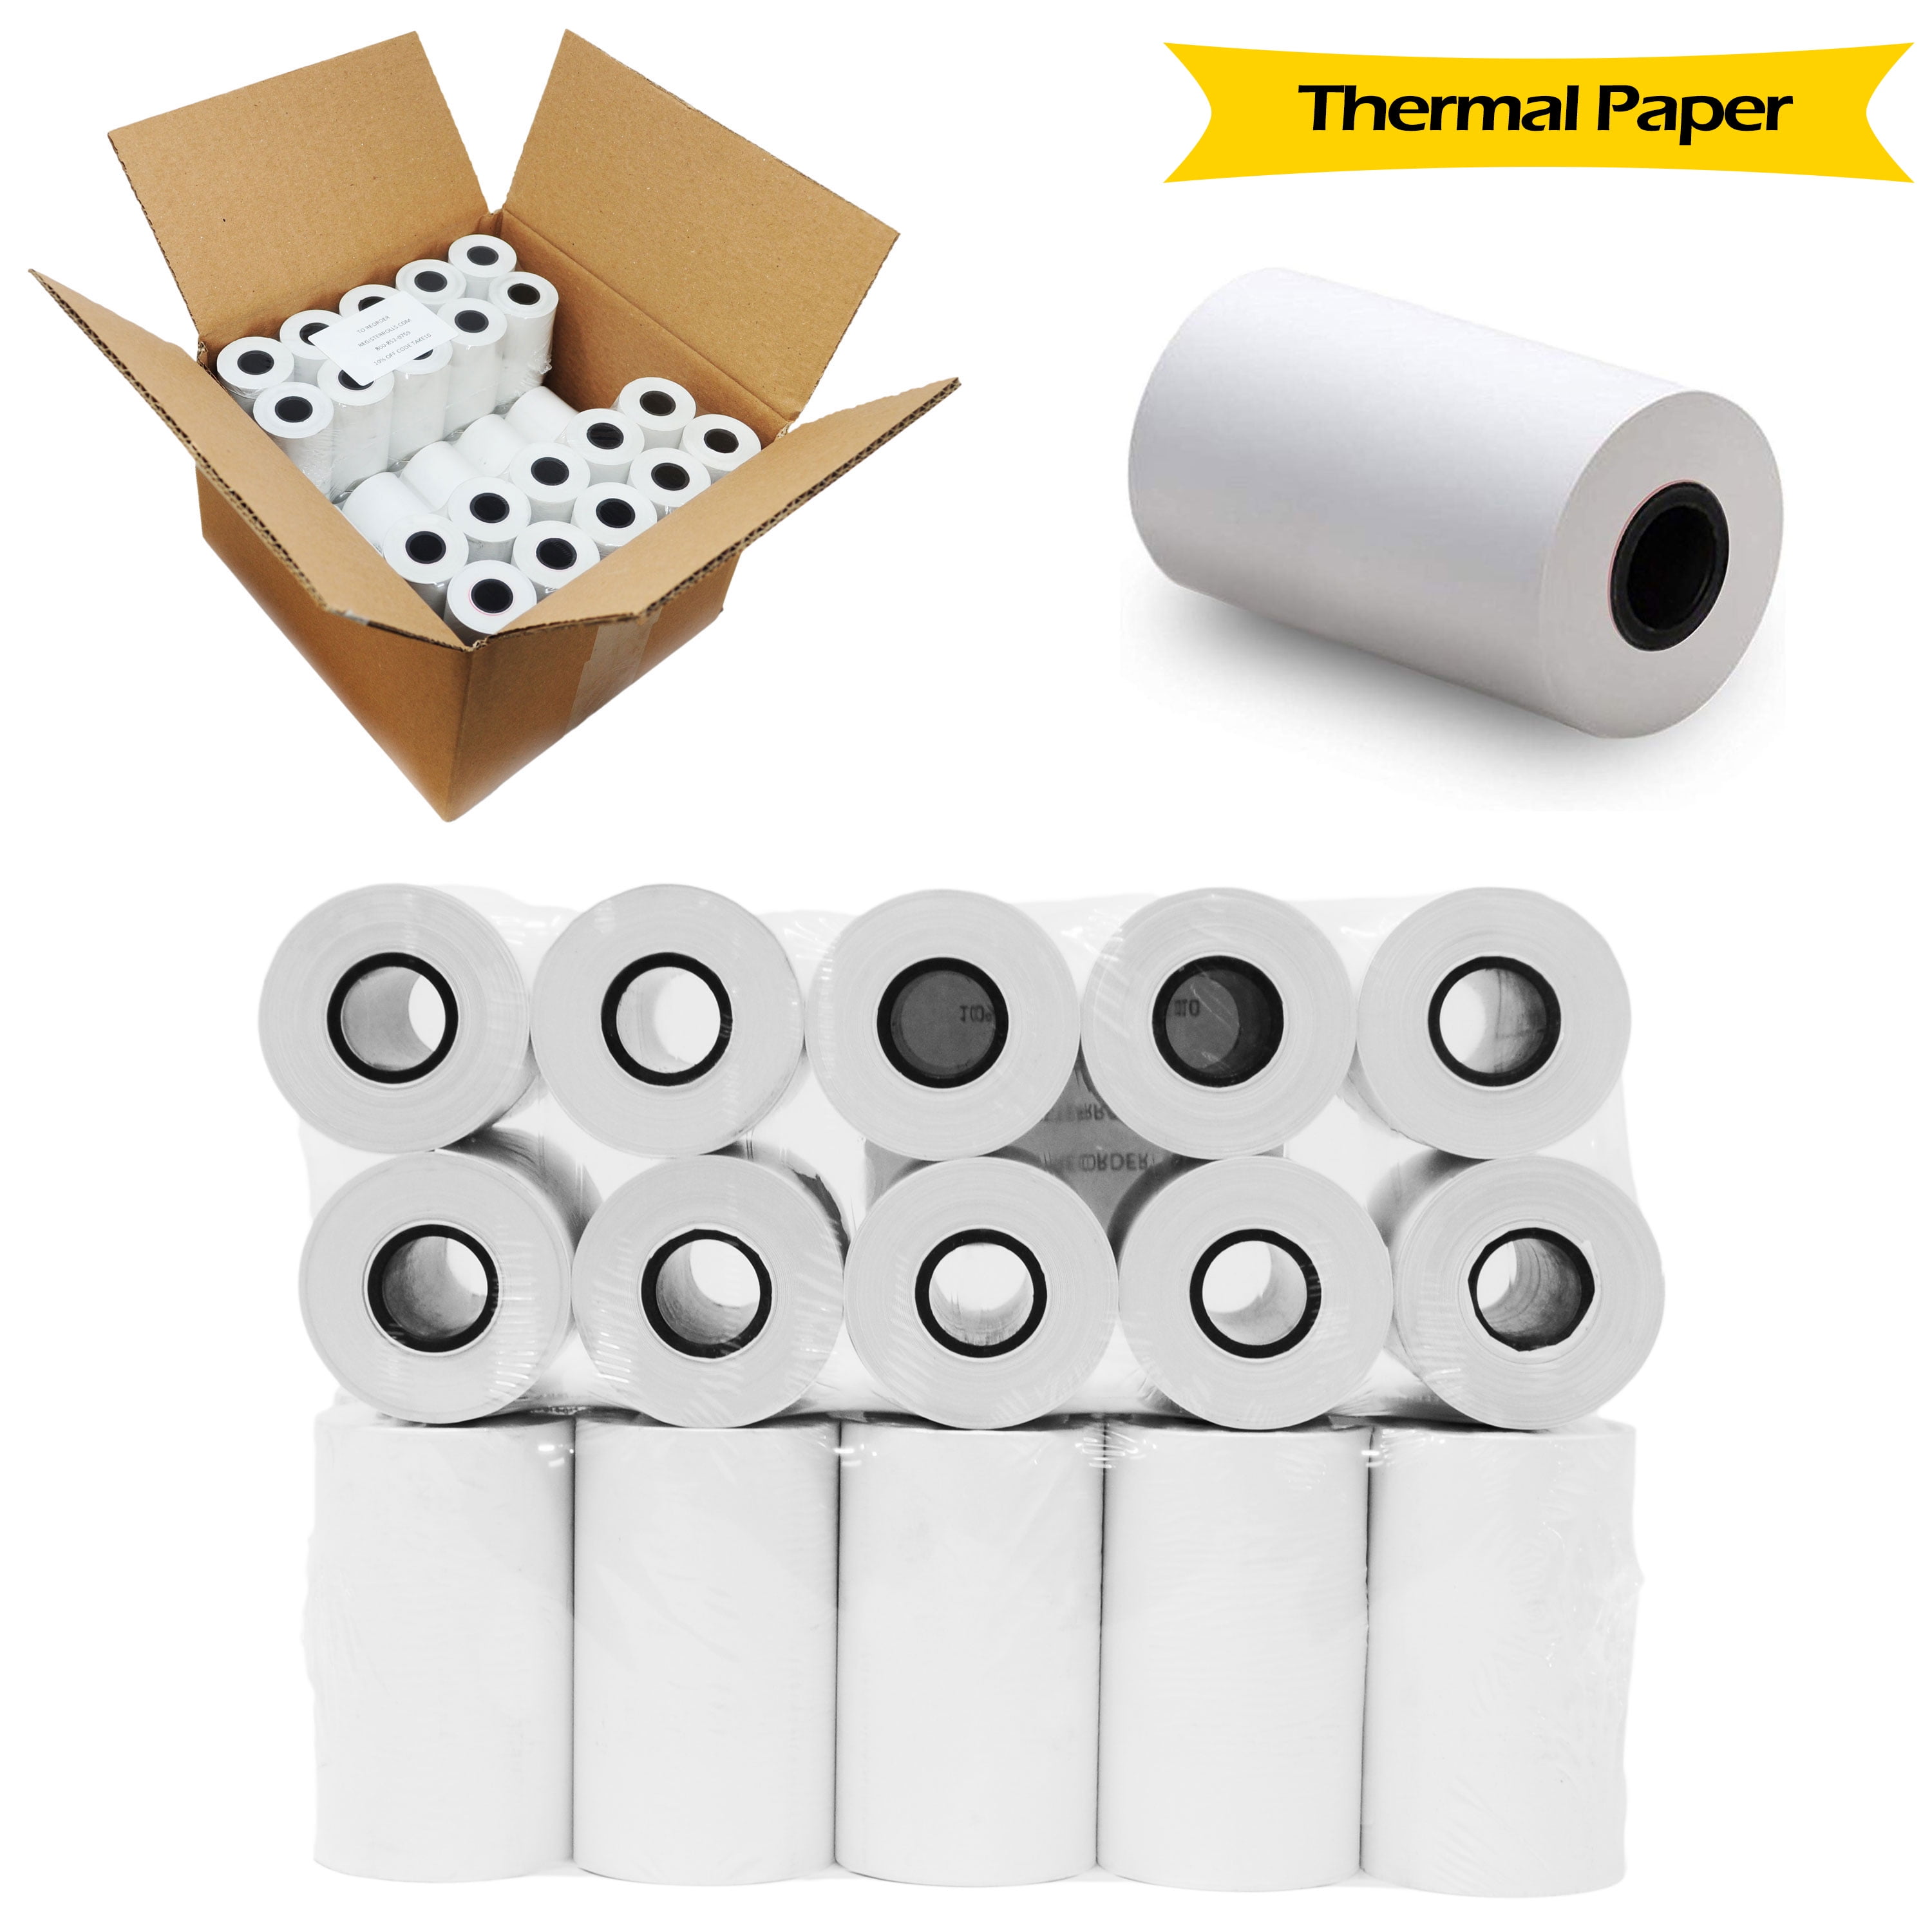 100 ROLLS CREDIT CARD REGISTER POS THERMAL RECEIPT PAPER 2 1/4" x 50' for iCT220 